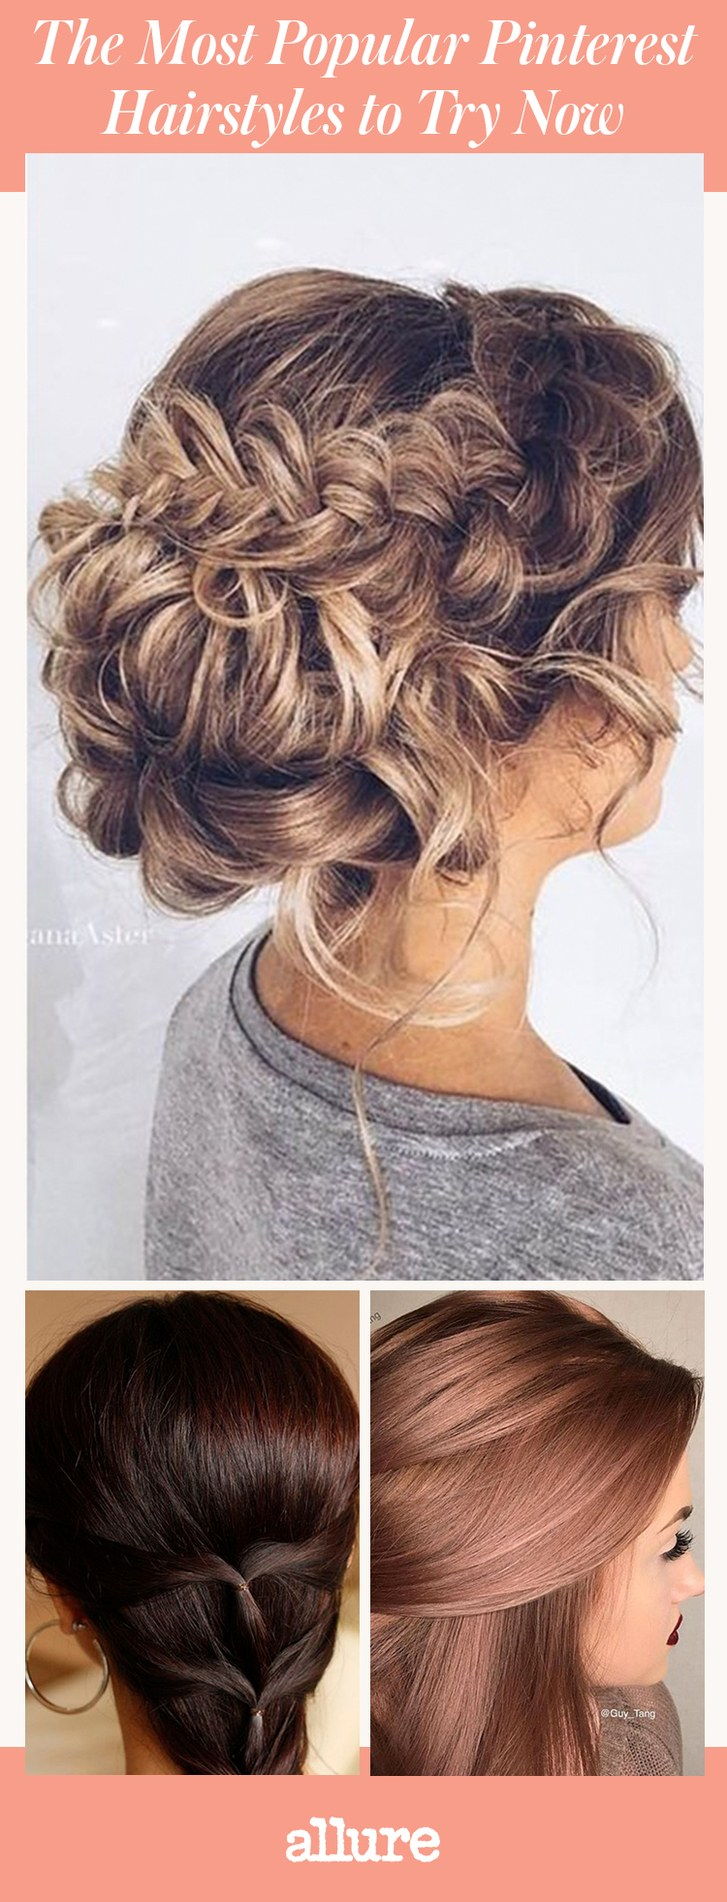 Тхе Most Popular Pinterest Hairstyles to Try Now